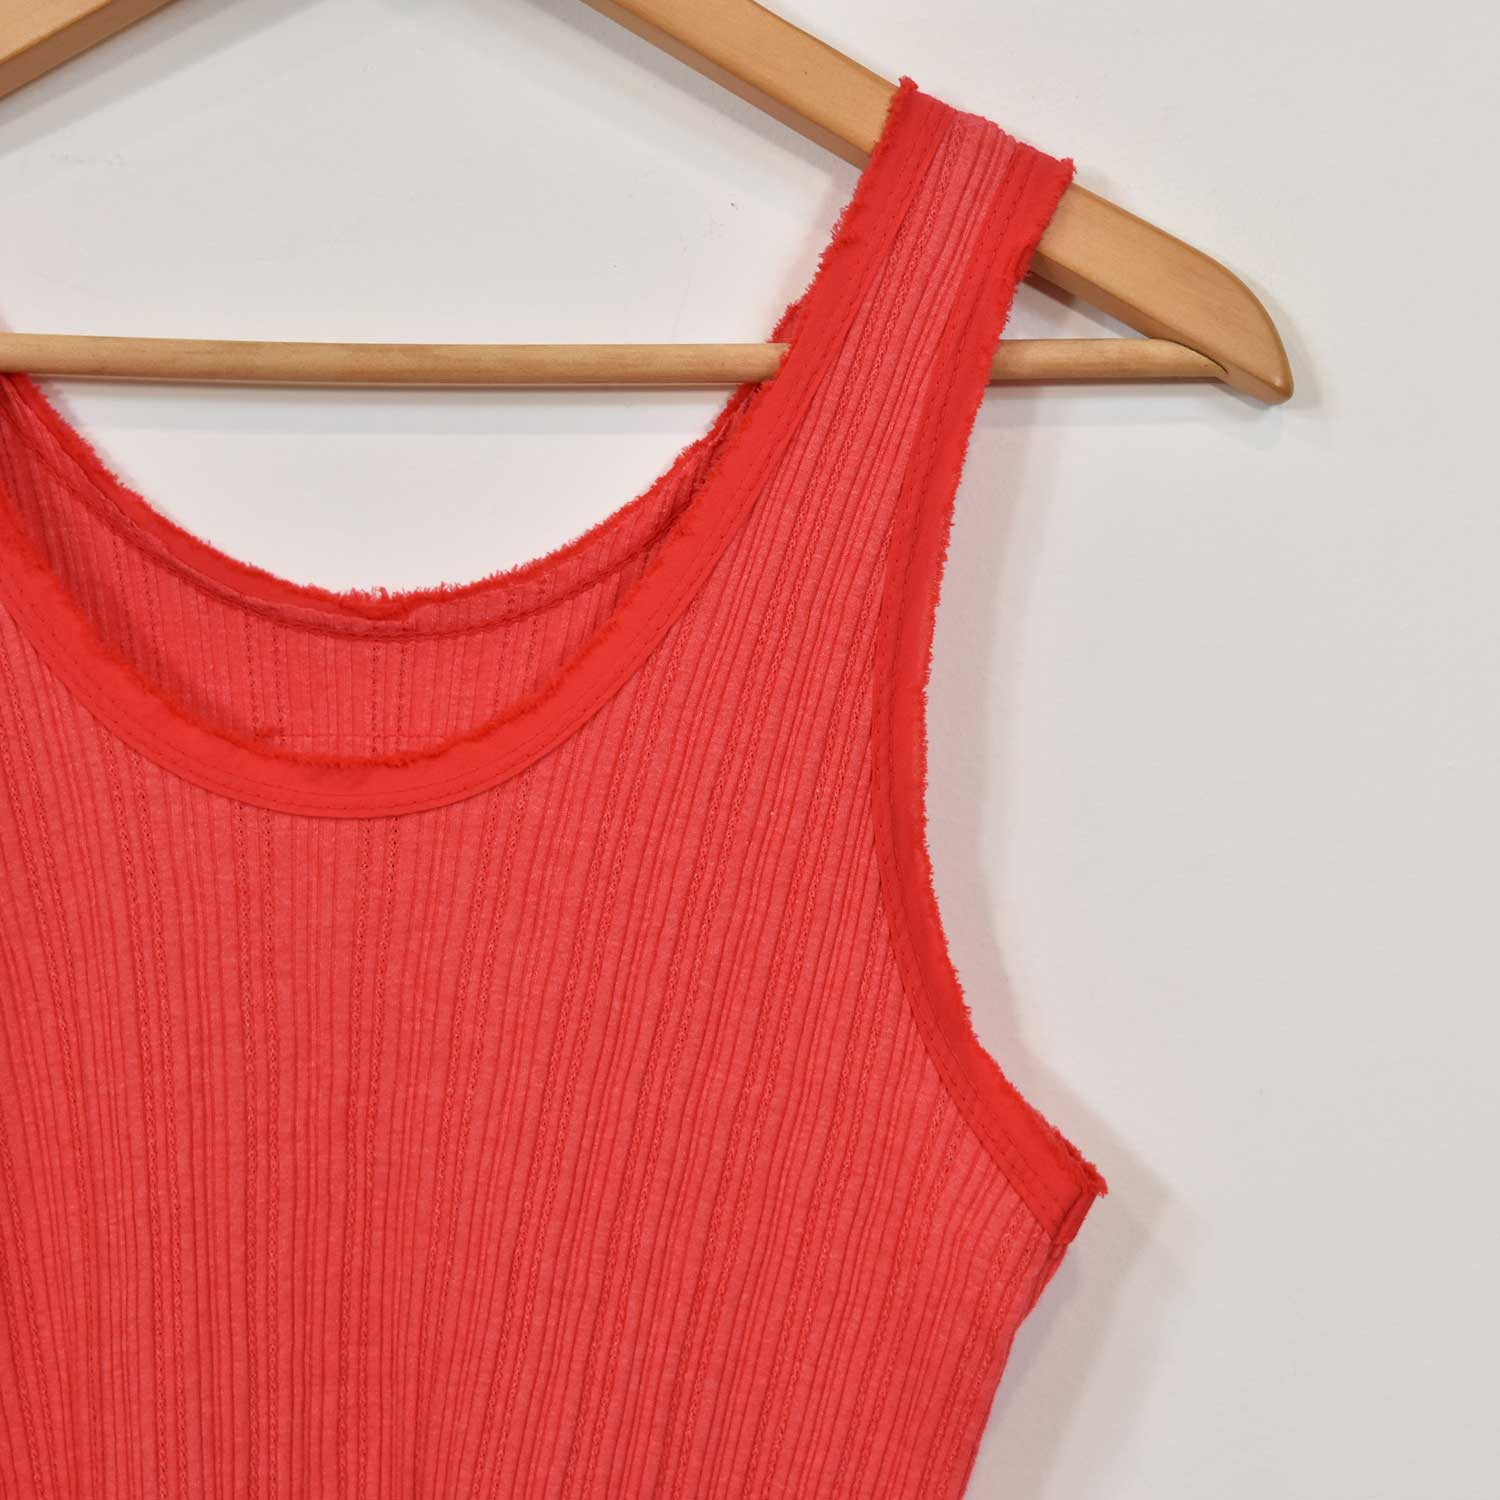 Red texture strap tank